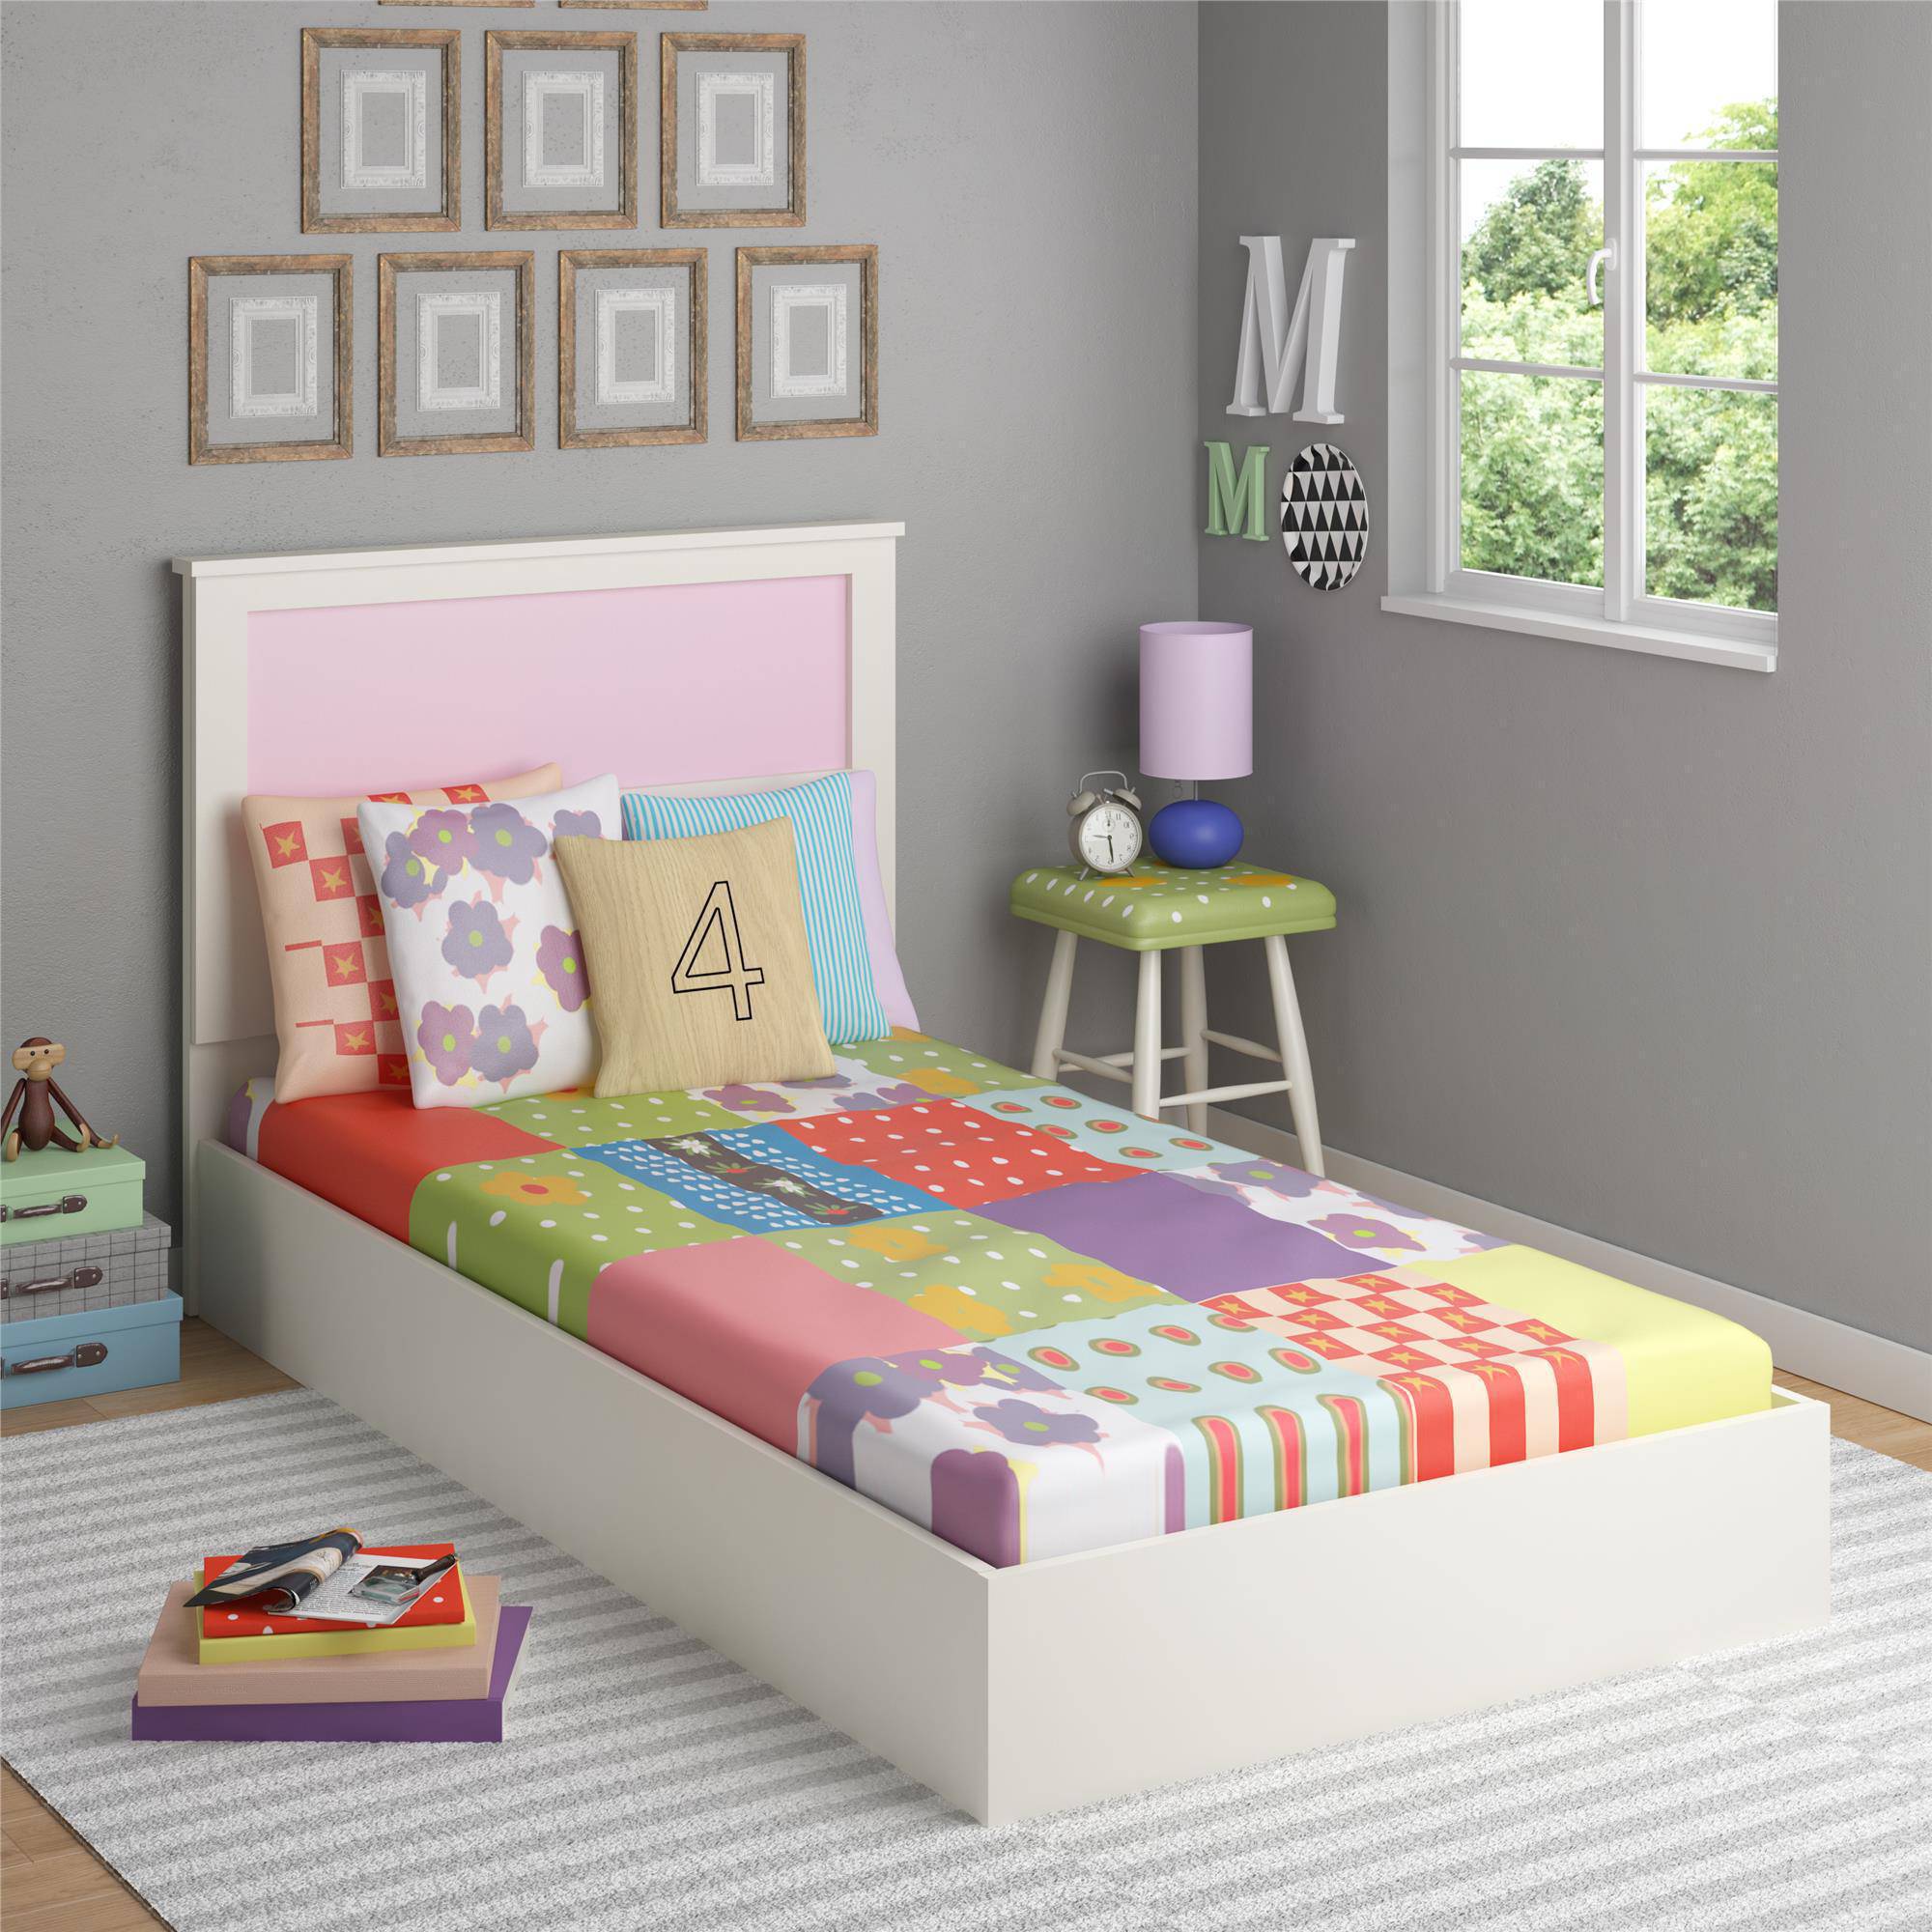 twin bed age for kids photo - 5